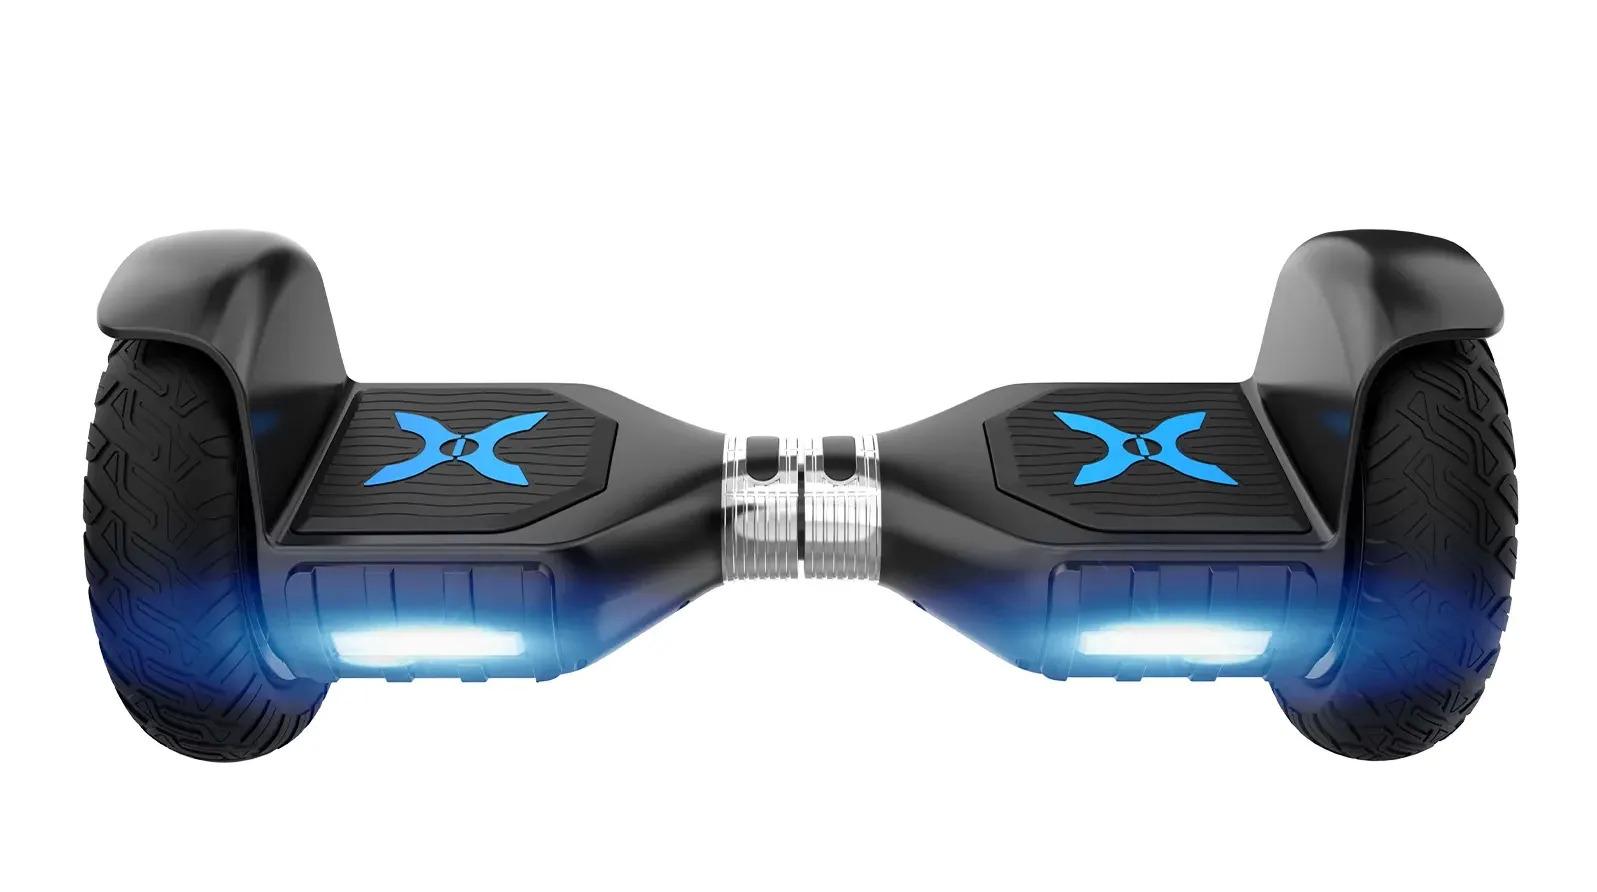 Hover-1 Ranger Pro Electric Self-Balancing Hoverboard for $98 Shipped